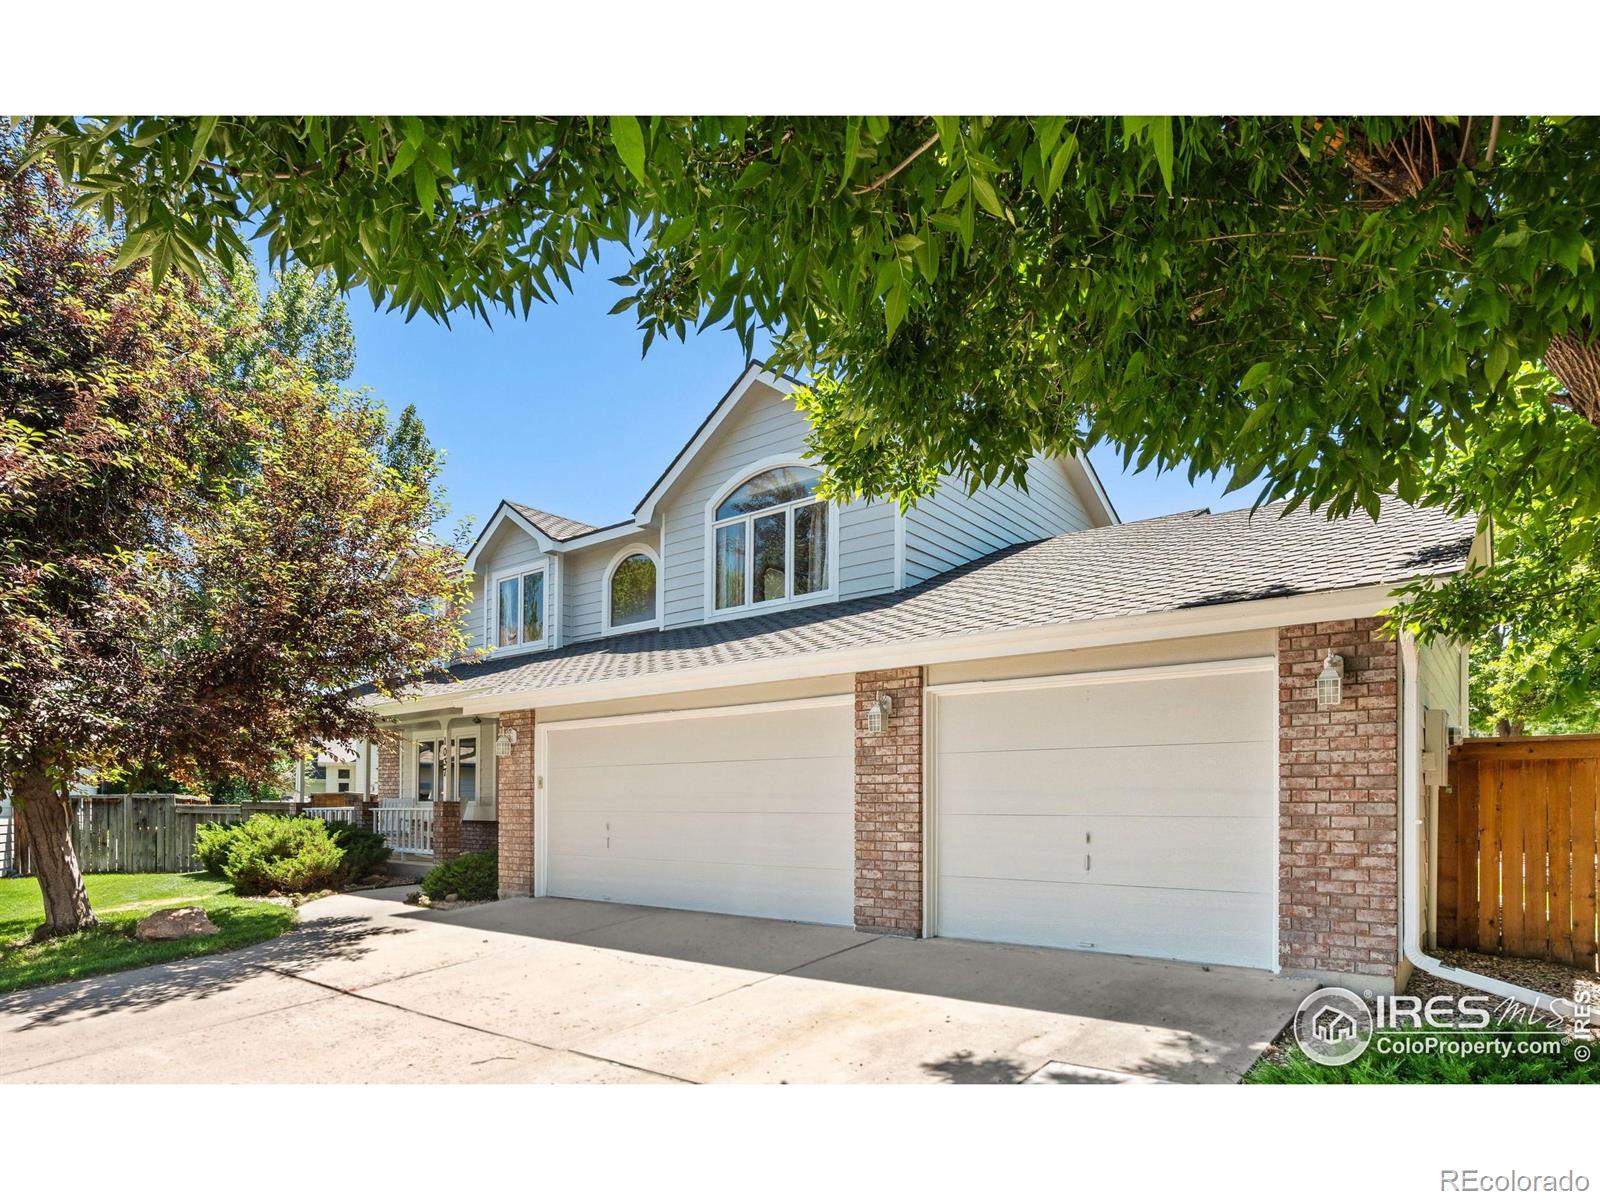 1037  Hinsdale Drive, fort collins MLS: 4567891012022 Beds: 5 Baths: 4 Price: $770,000